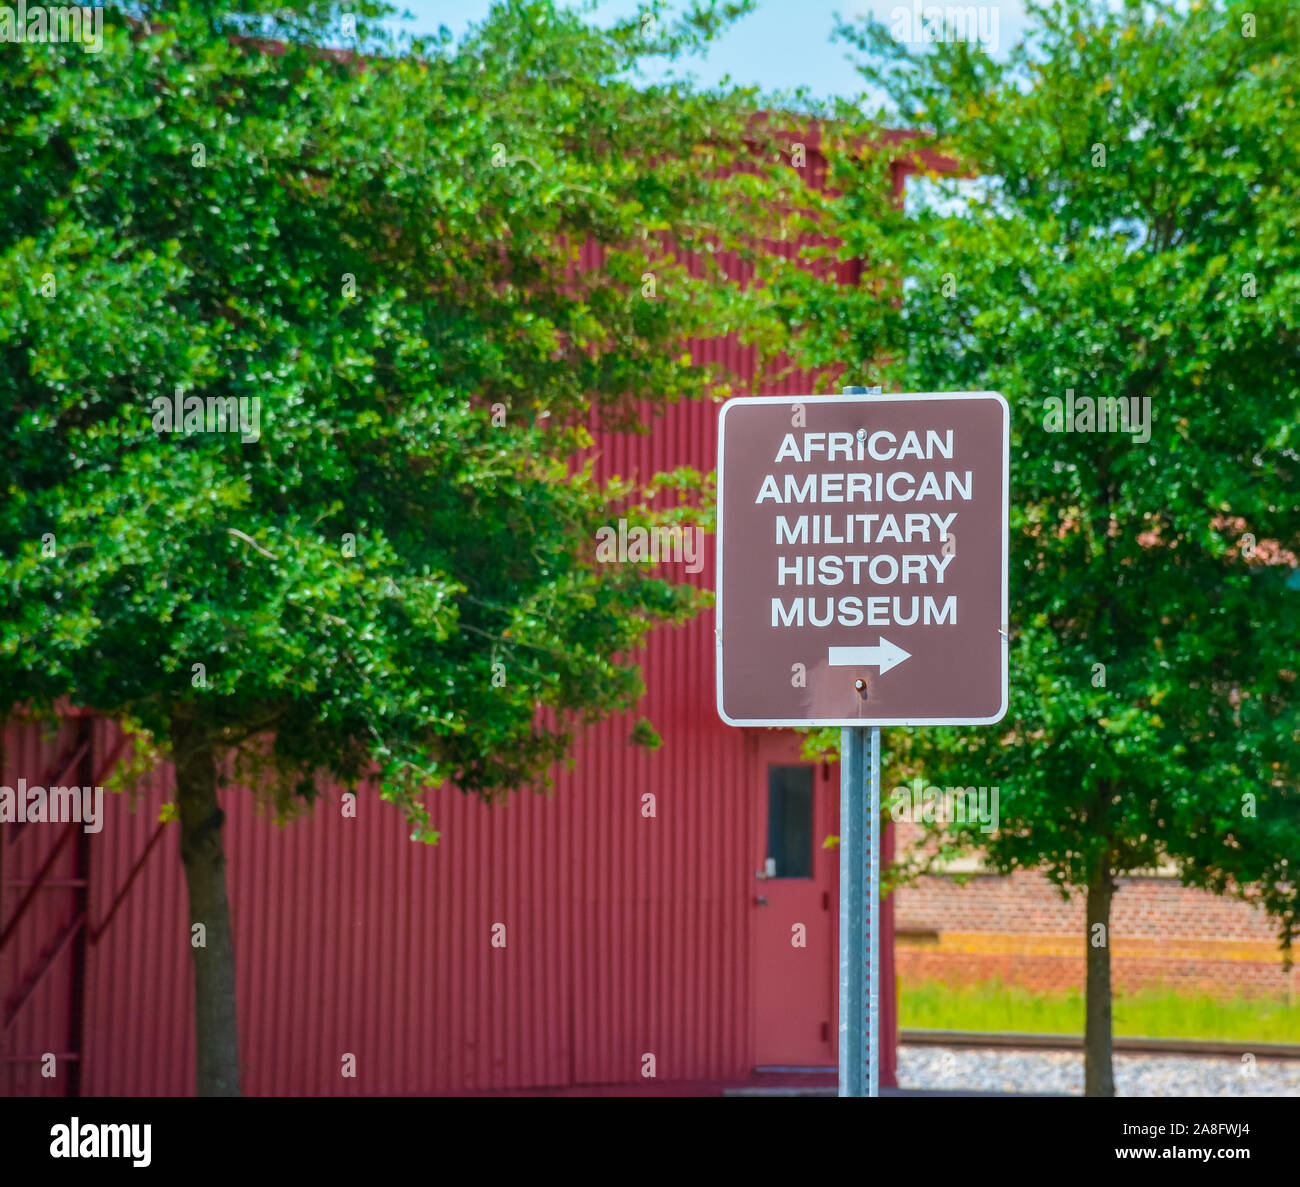 A metal sign for the African American Military History Museum in small town america, Hattiesburg, MS, USA Stock Photo